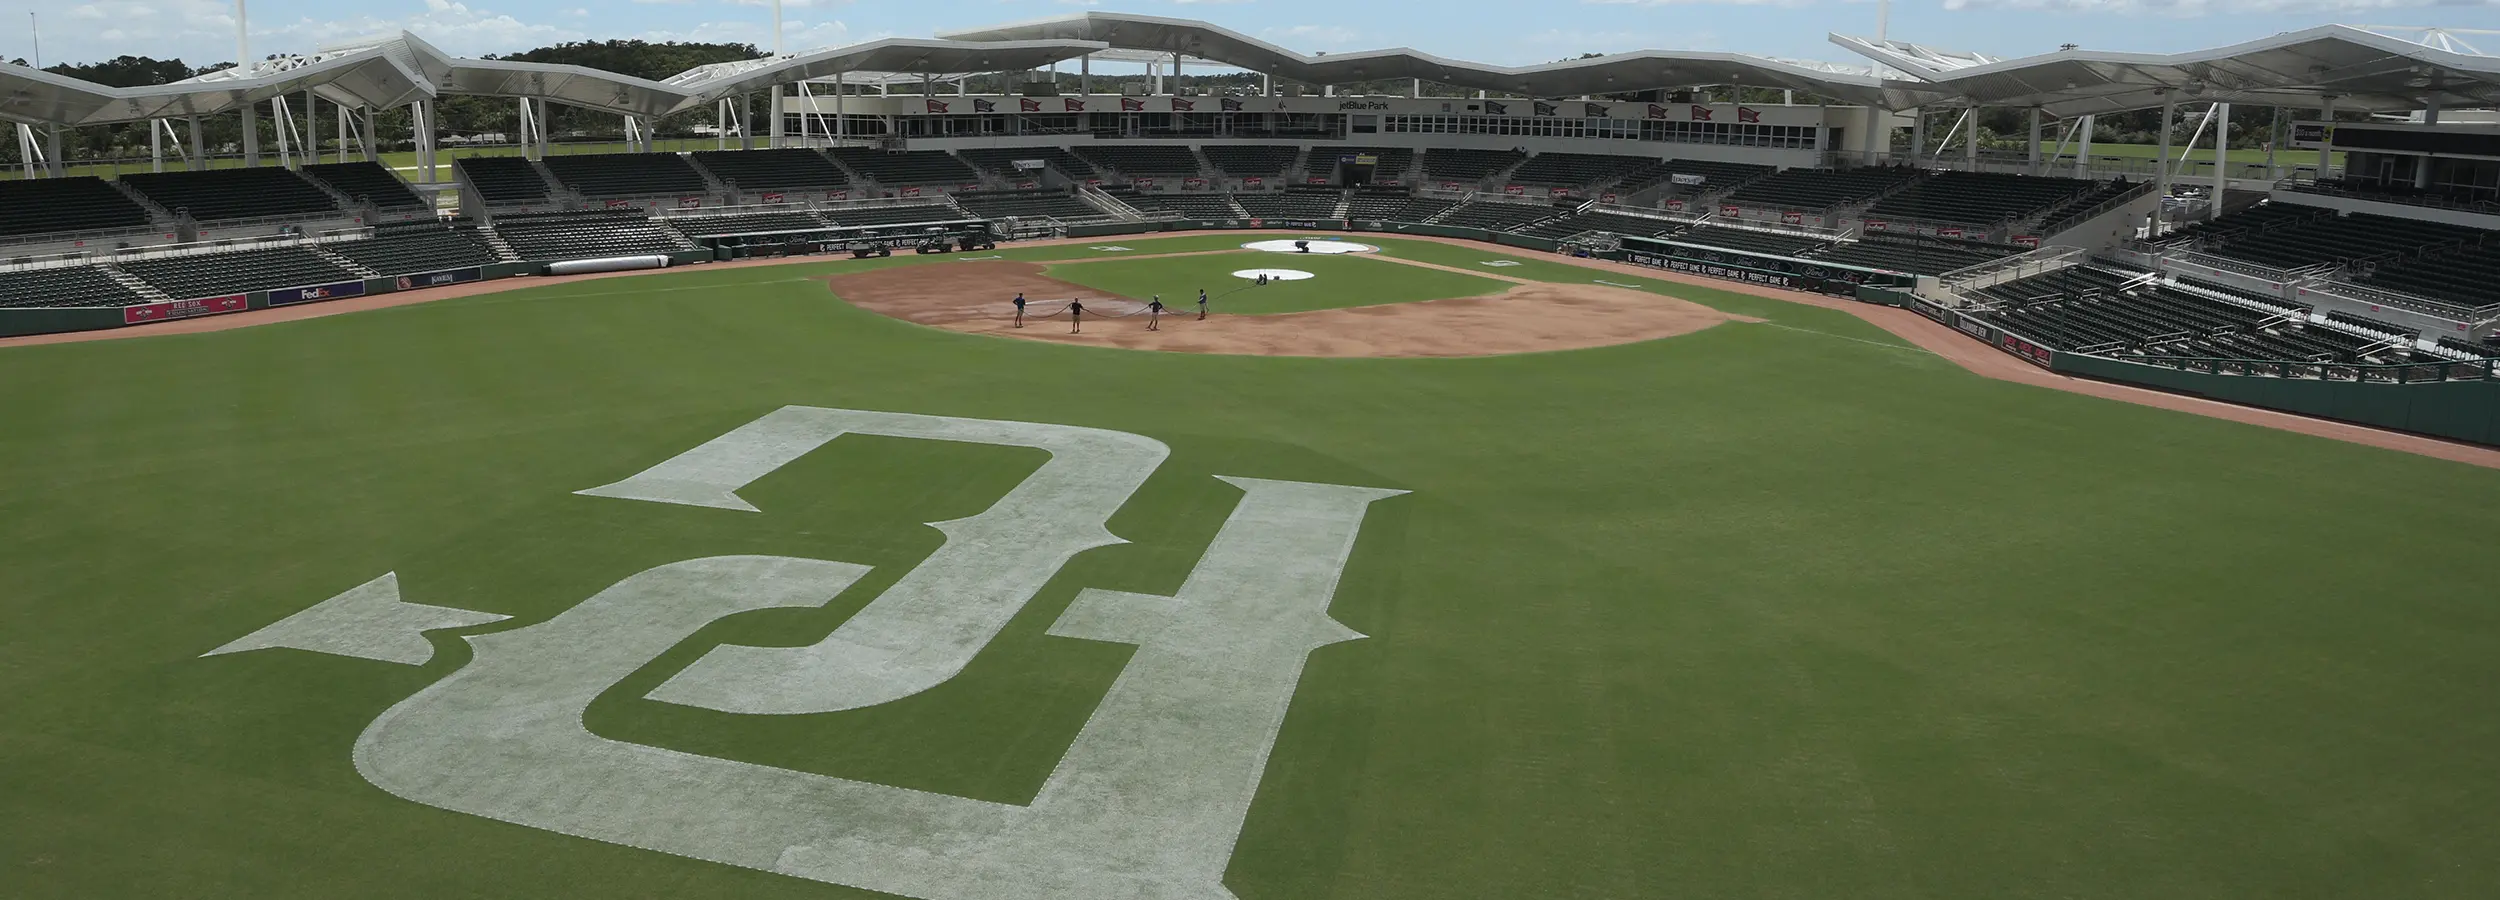 Development around JetBlue Park in question for a decade; fans